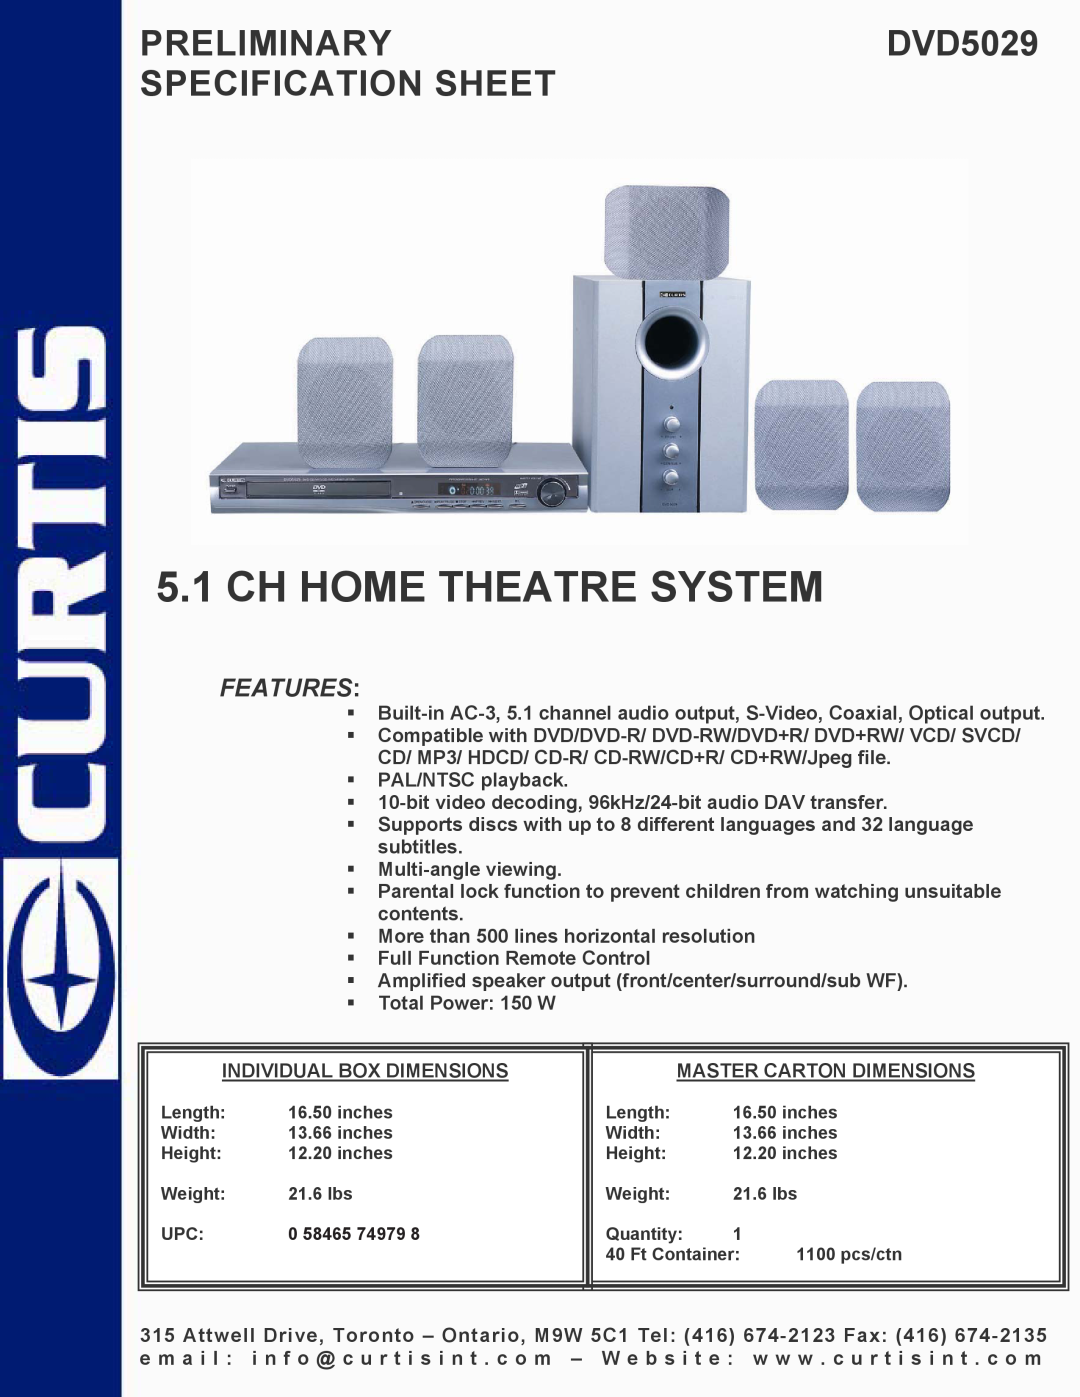 Curtis specifications Ch Home Theatre System, PRELIMINARYDVD5029 SPECIFICATION SHEET, Features 